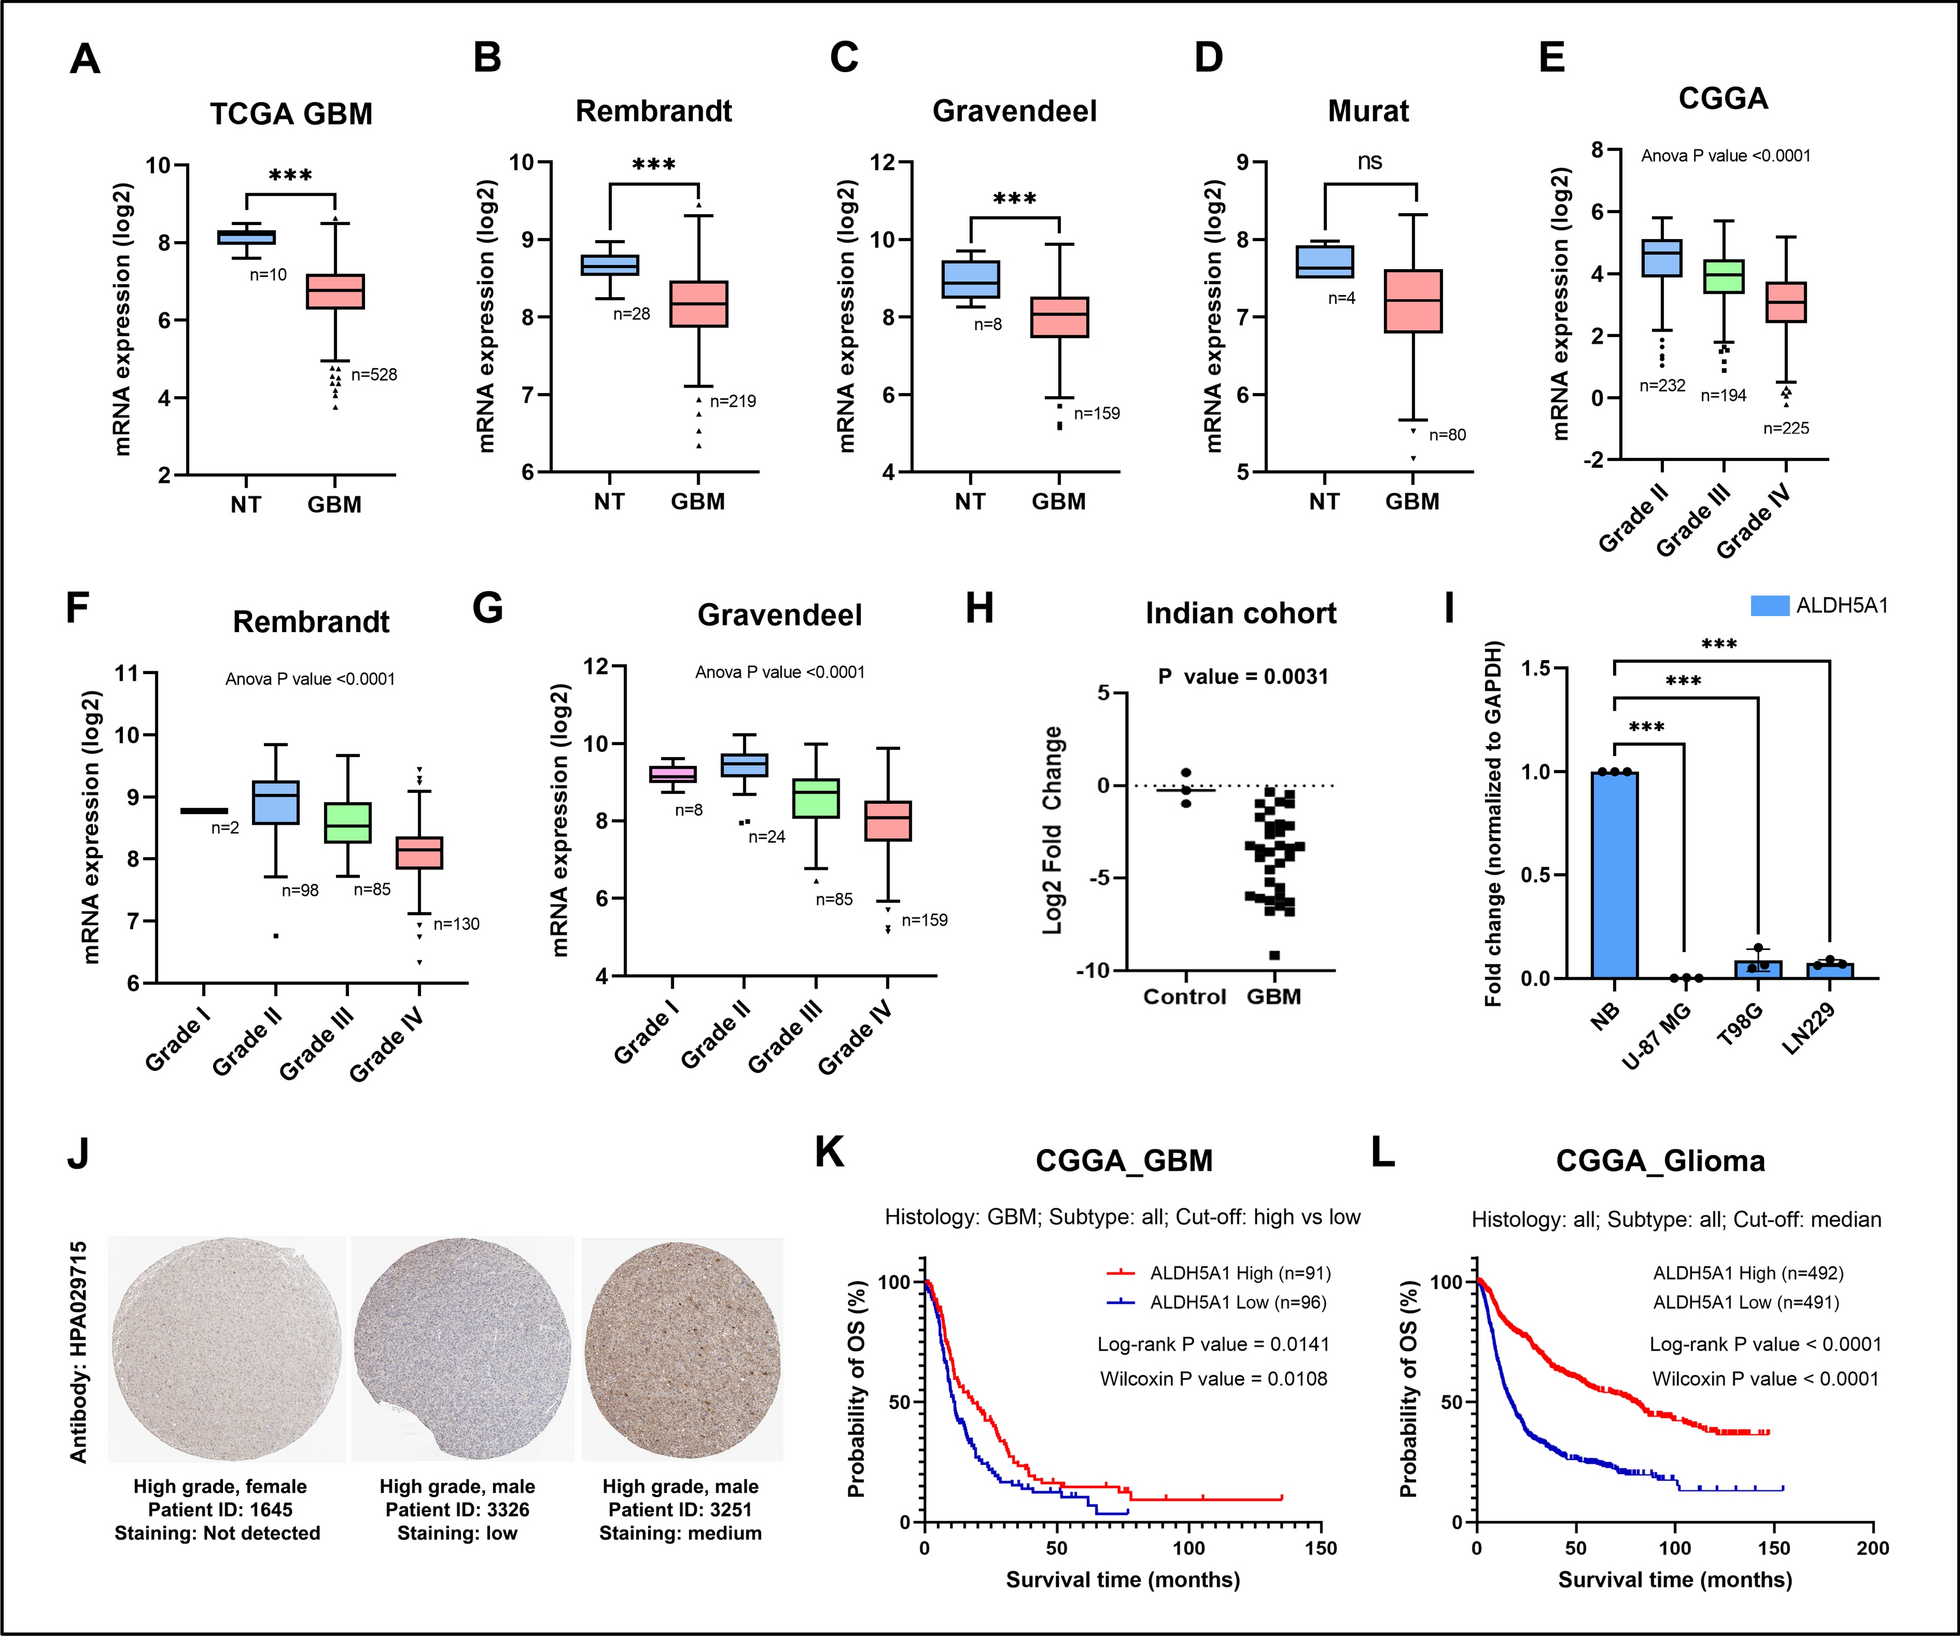 ALDH5A1/miR-210 axis plays a key role in reprogramming cellular metabolism and has a significant correlation with glioblastoma patient survival